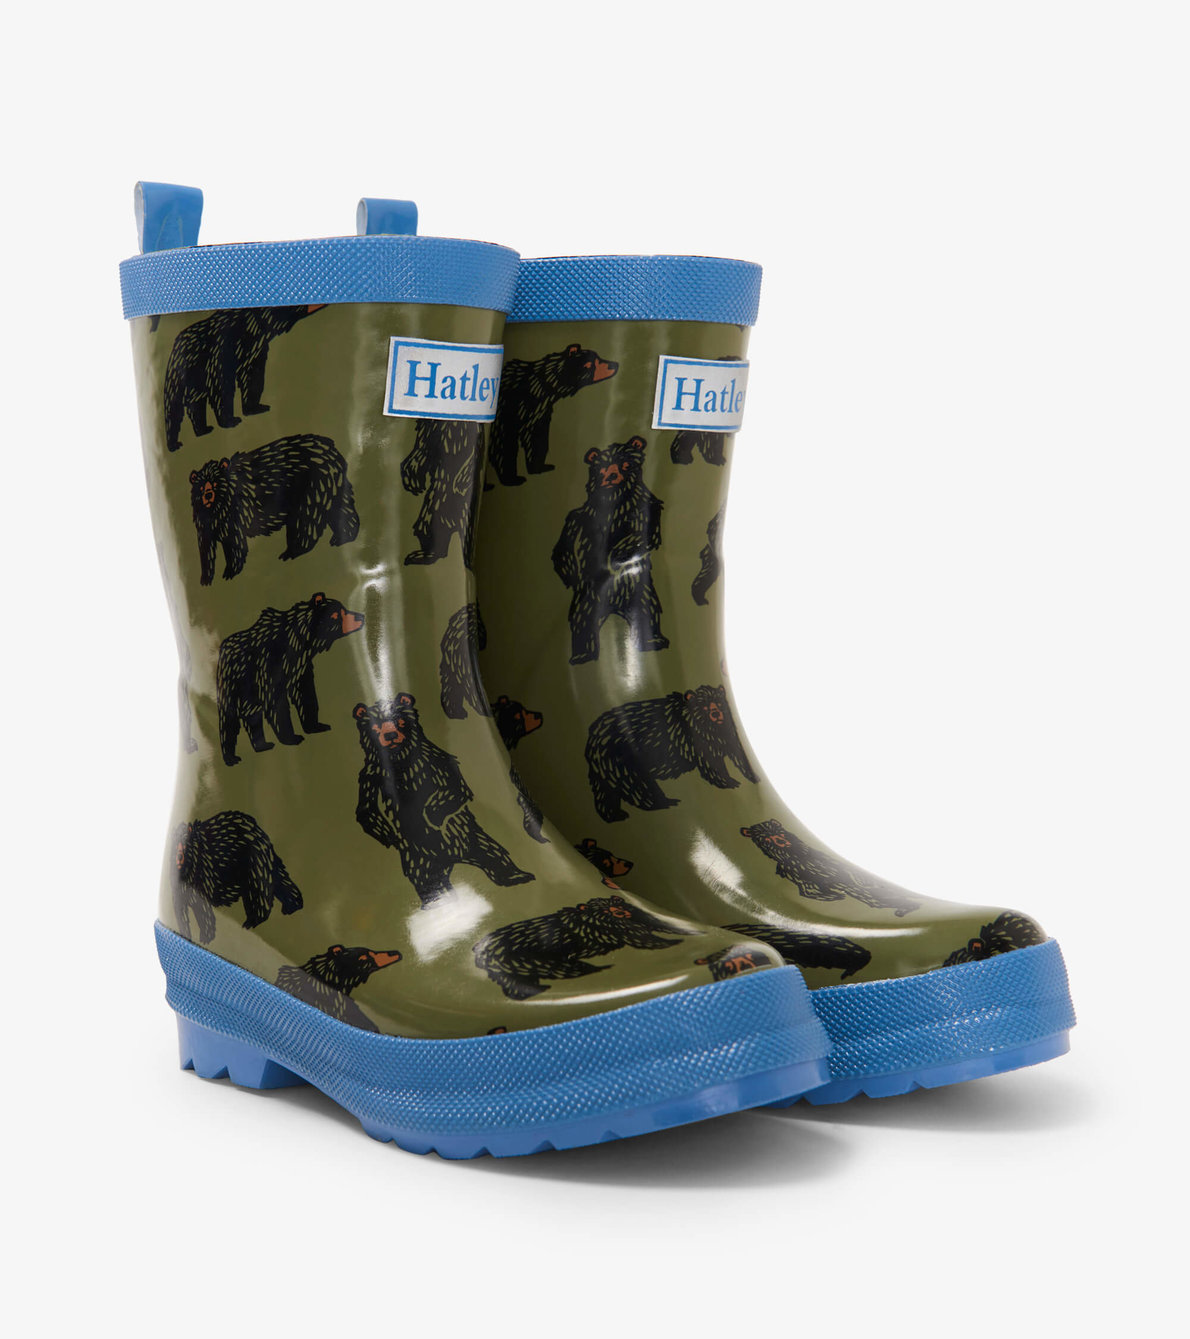 View larger image of My 1st Wellies - Wild Bears